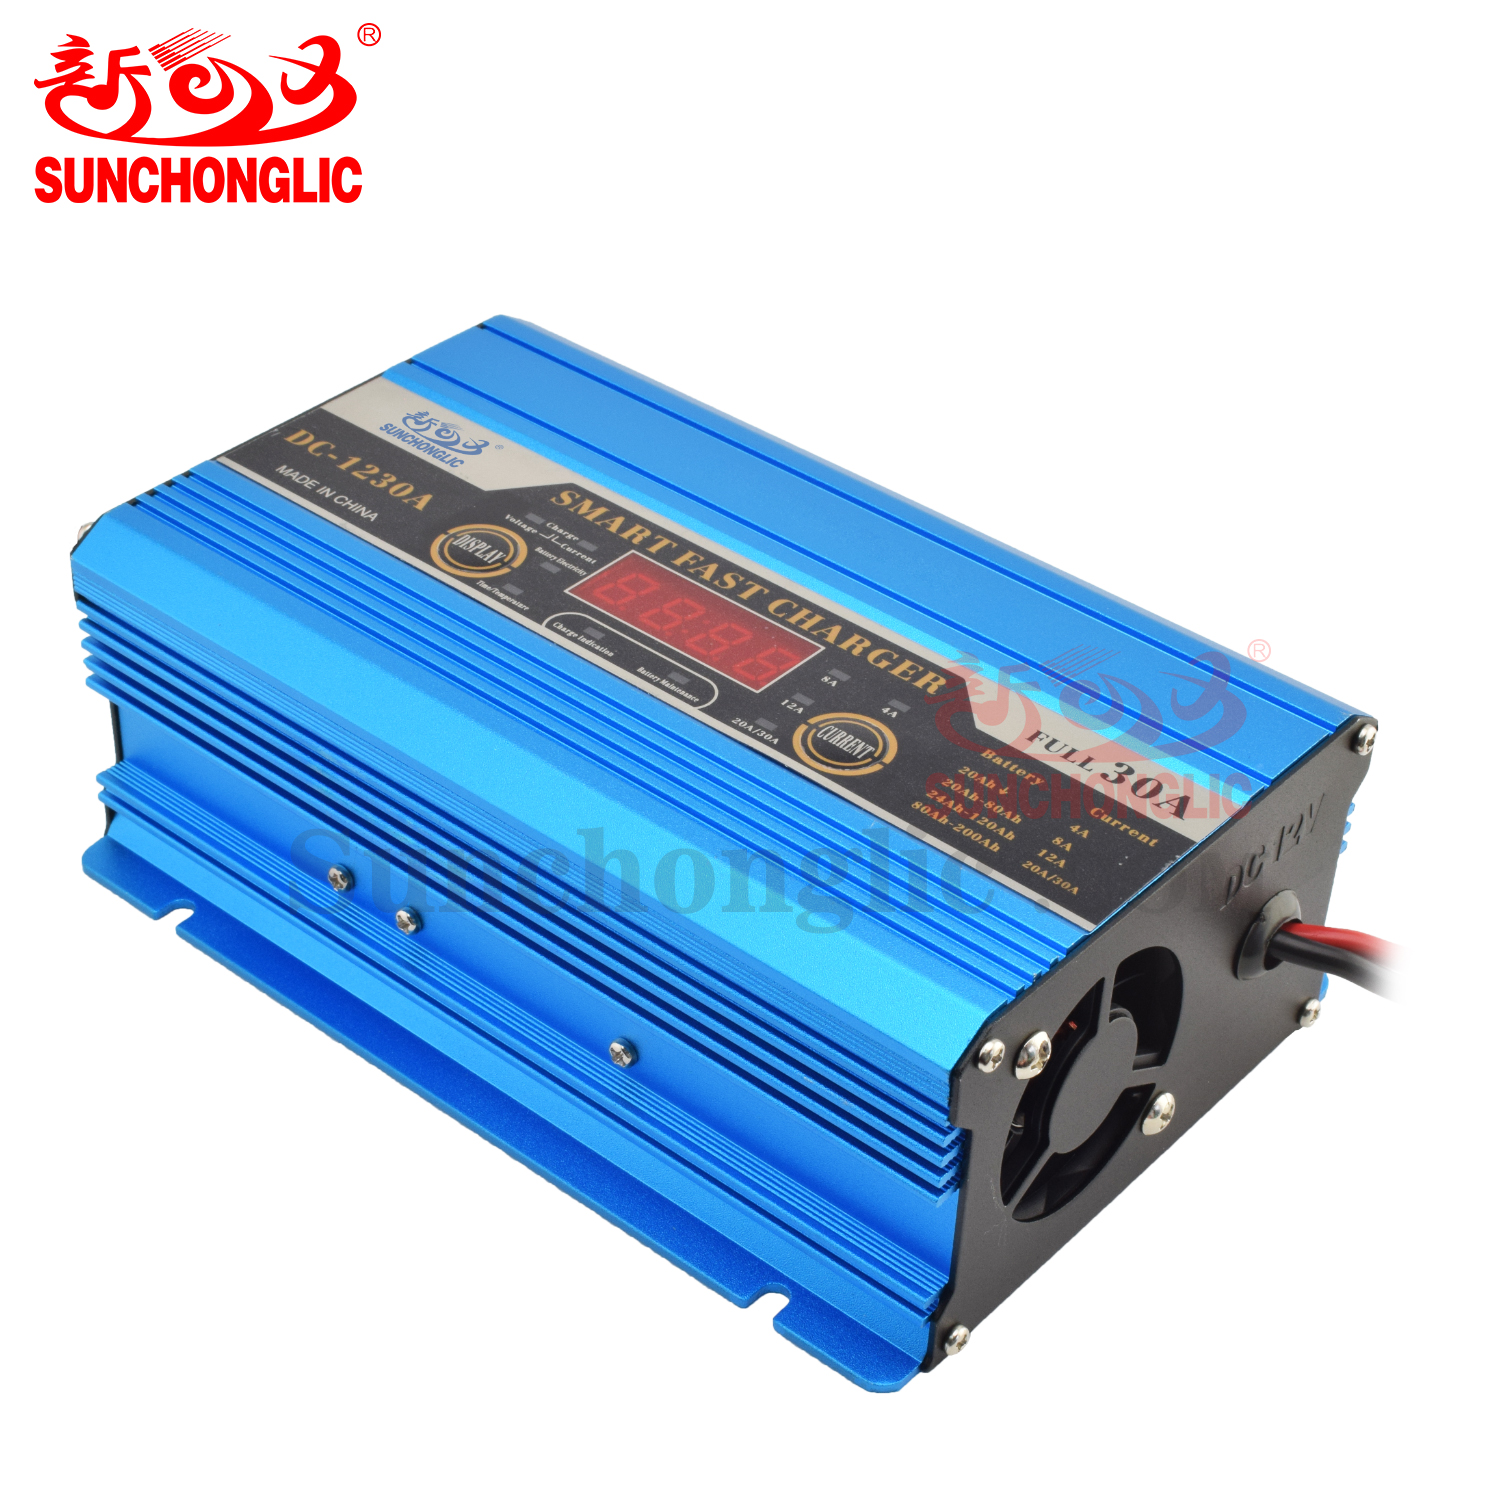 AGM/GEL Battery Charger - DC-1230A